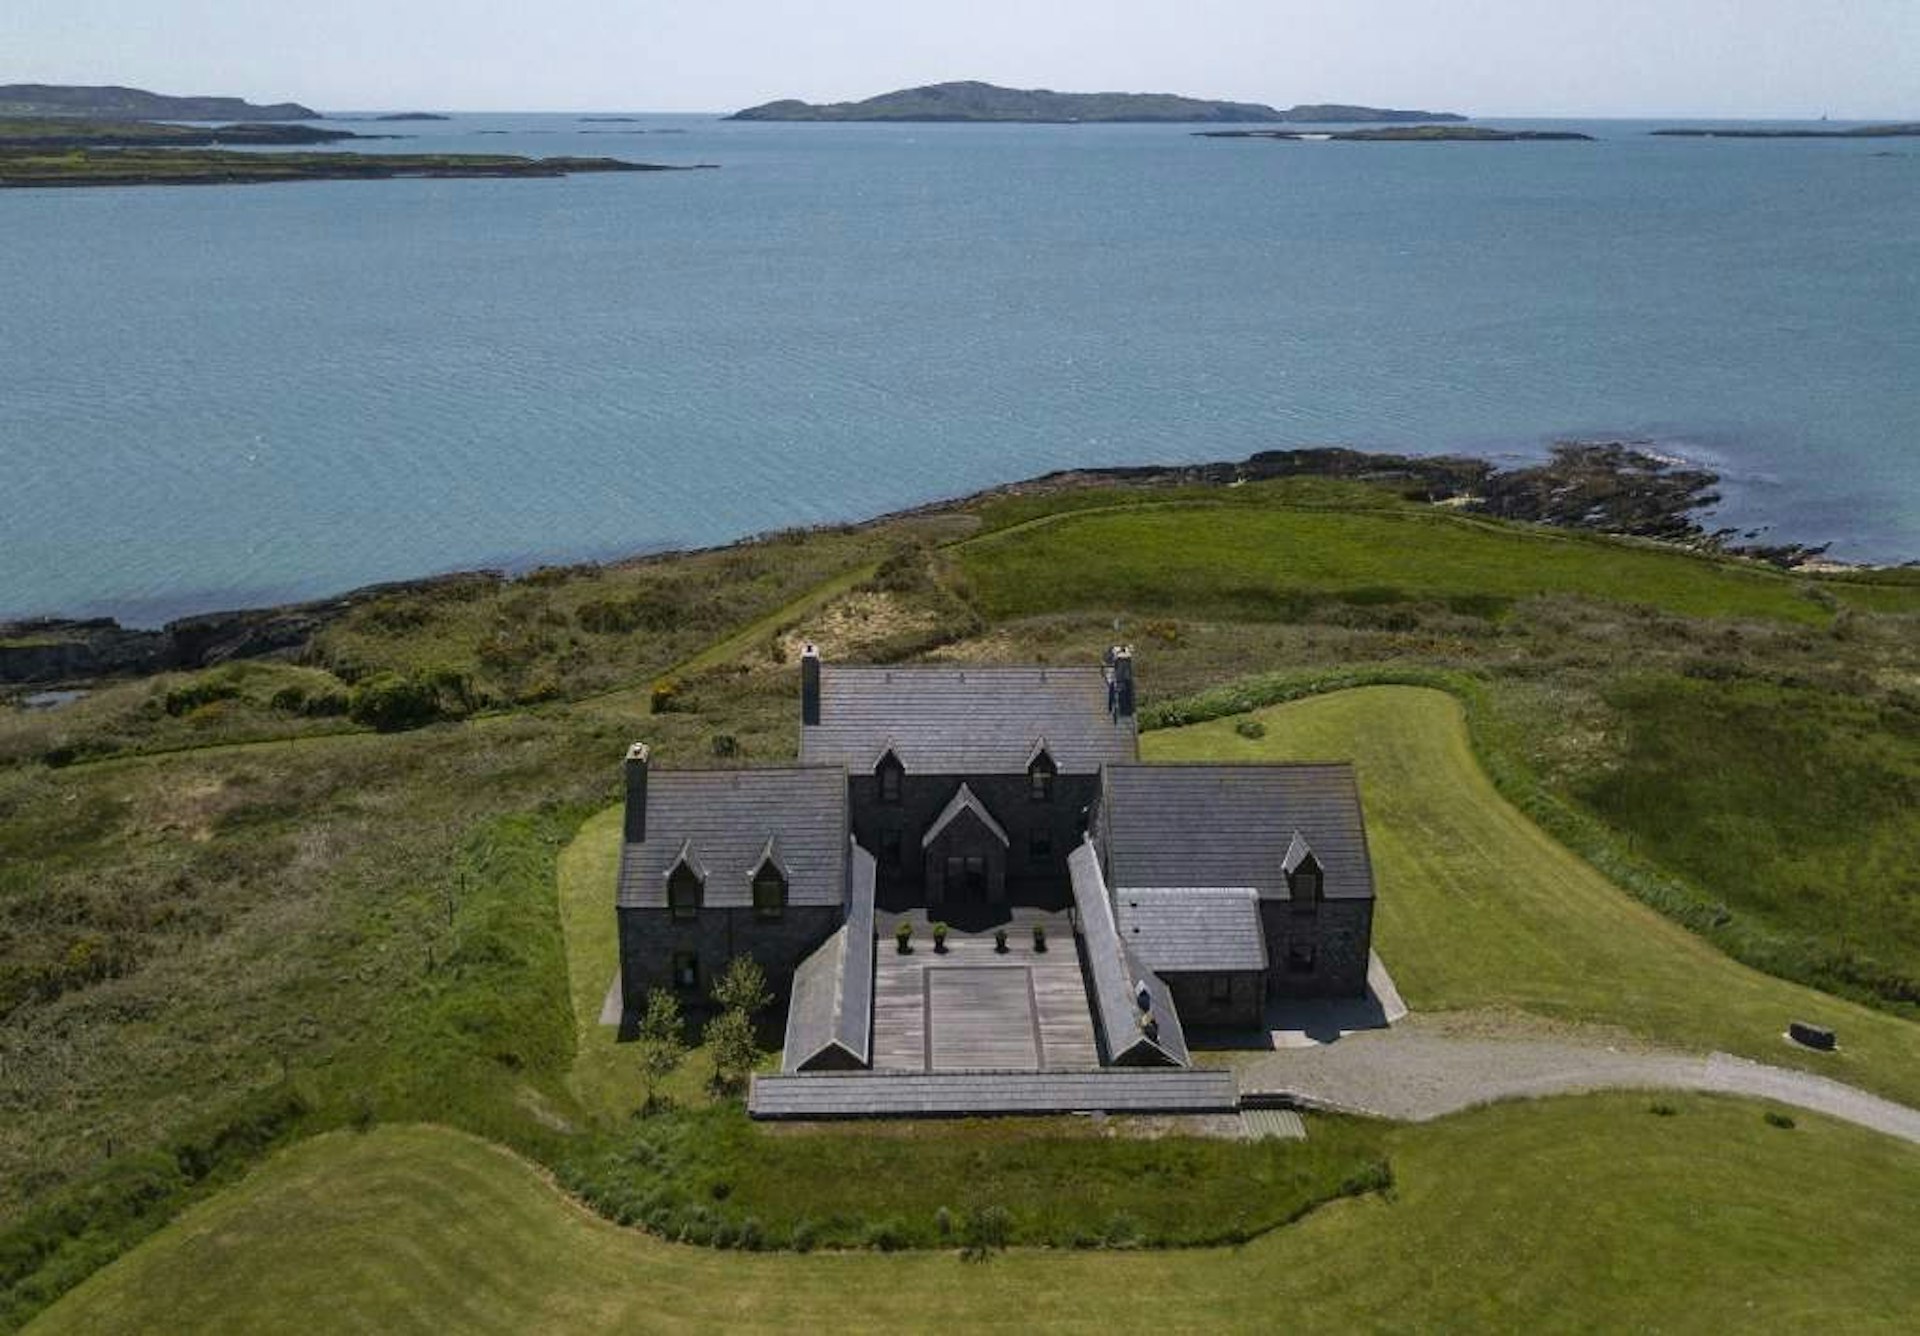 The main house on Horse Island in Schull, Cork